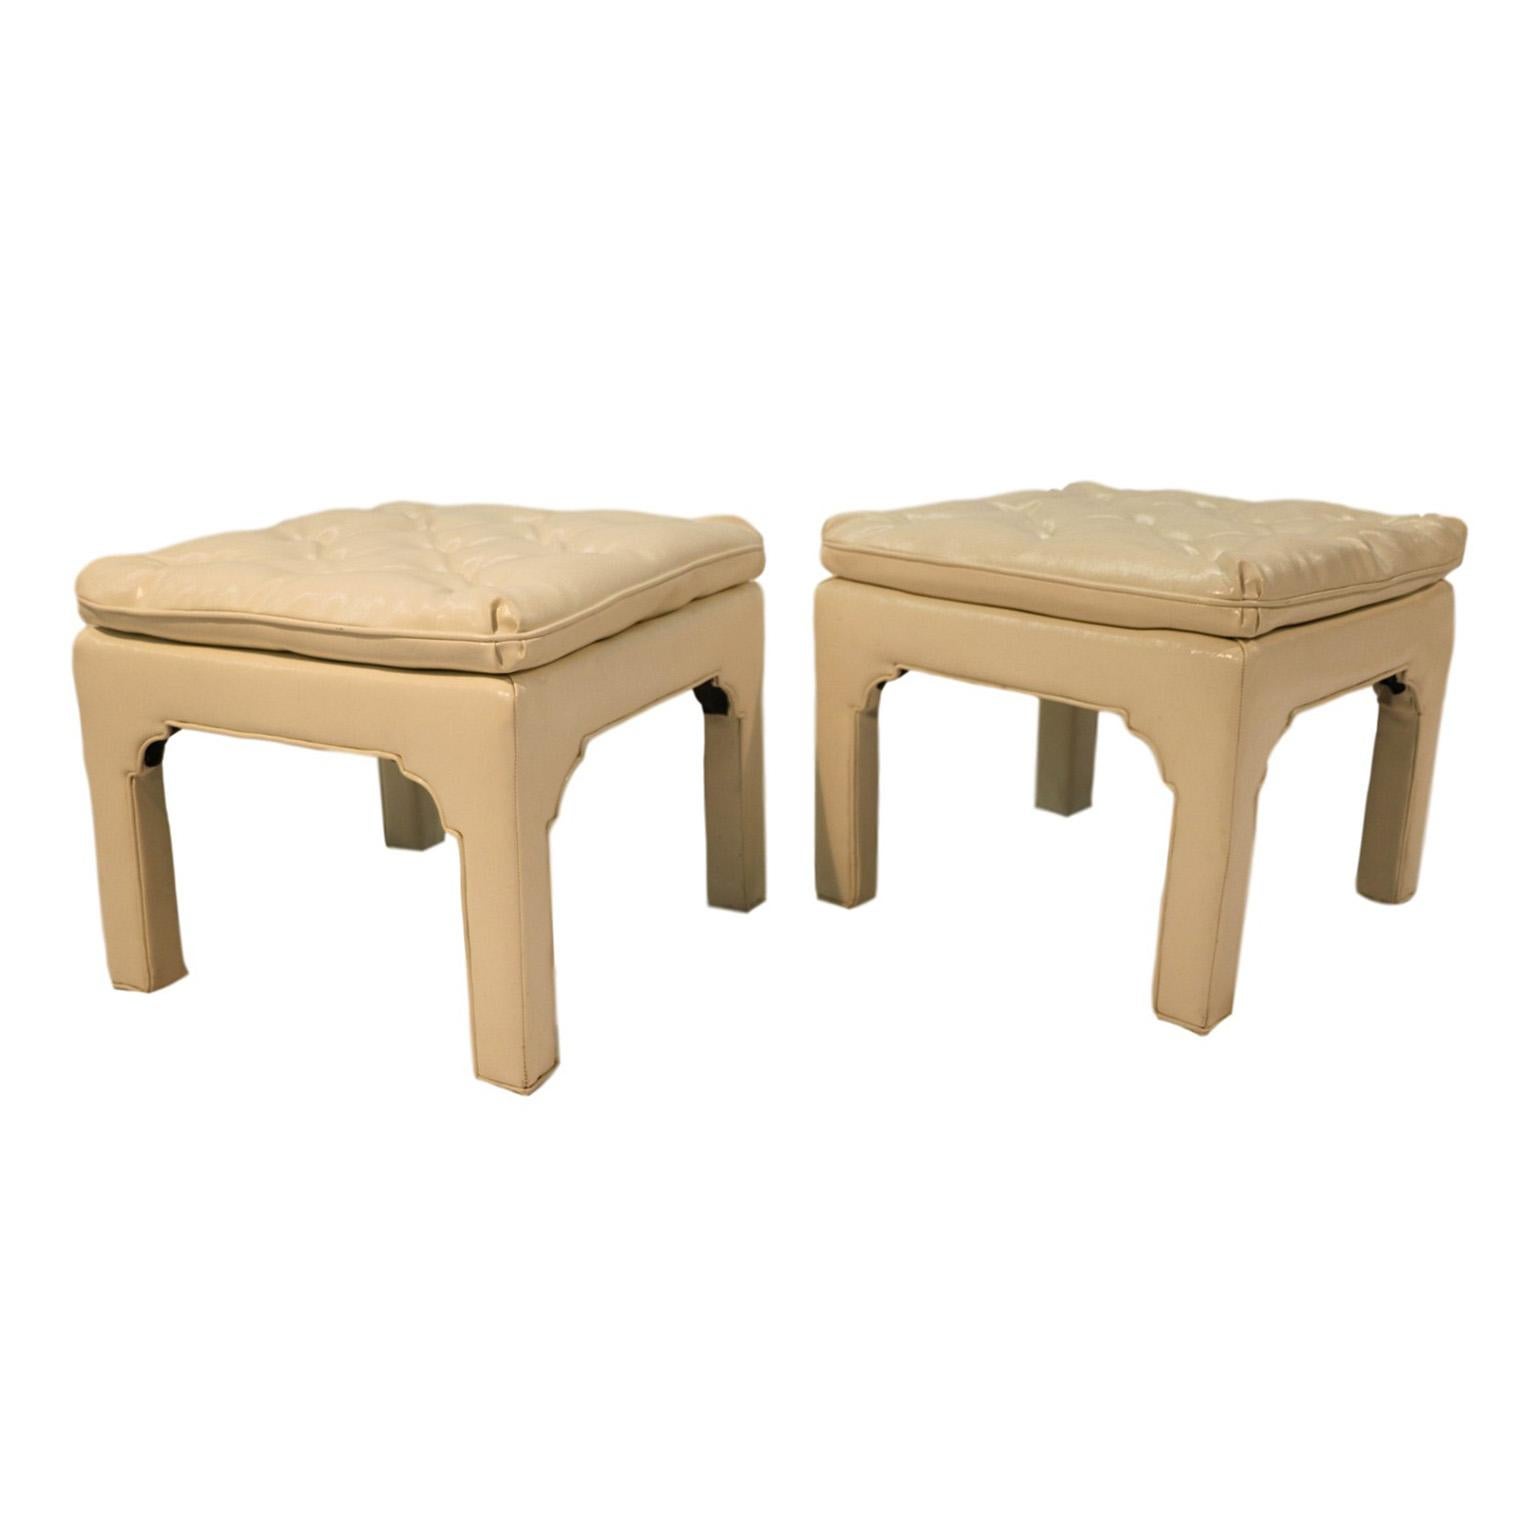 Designed by Coggin, manufactured for Milo Baughman. These elegant pair of fabulous button tufted ottomans, bench or coffee table are upholstered in an off-white vinyl. Uniquely sculpted sides in an open box frame adds a dramatic effect. Stylish and